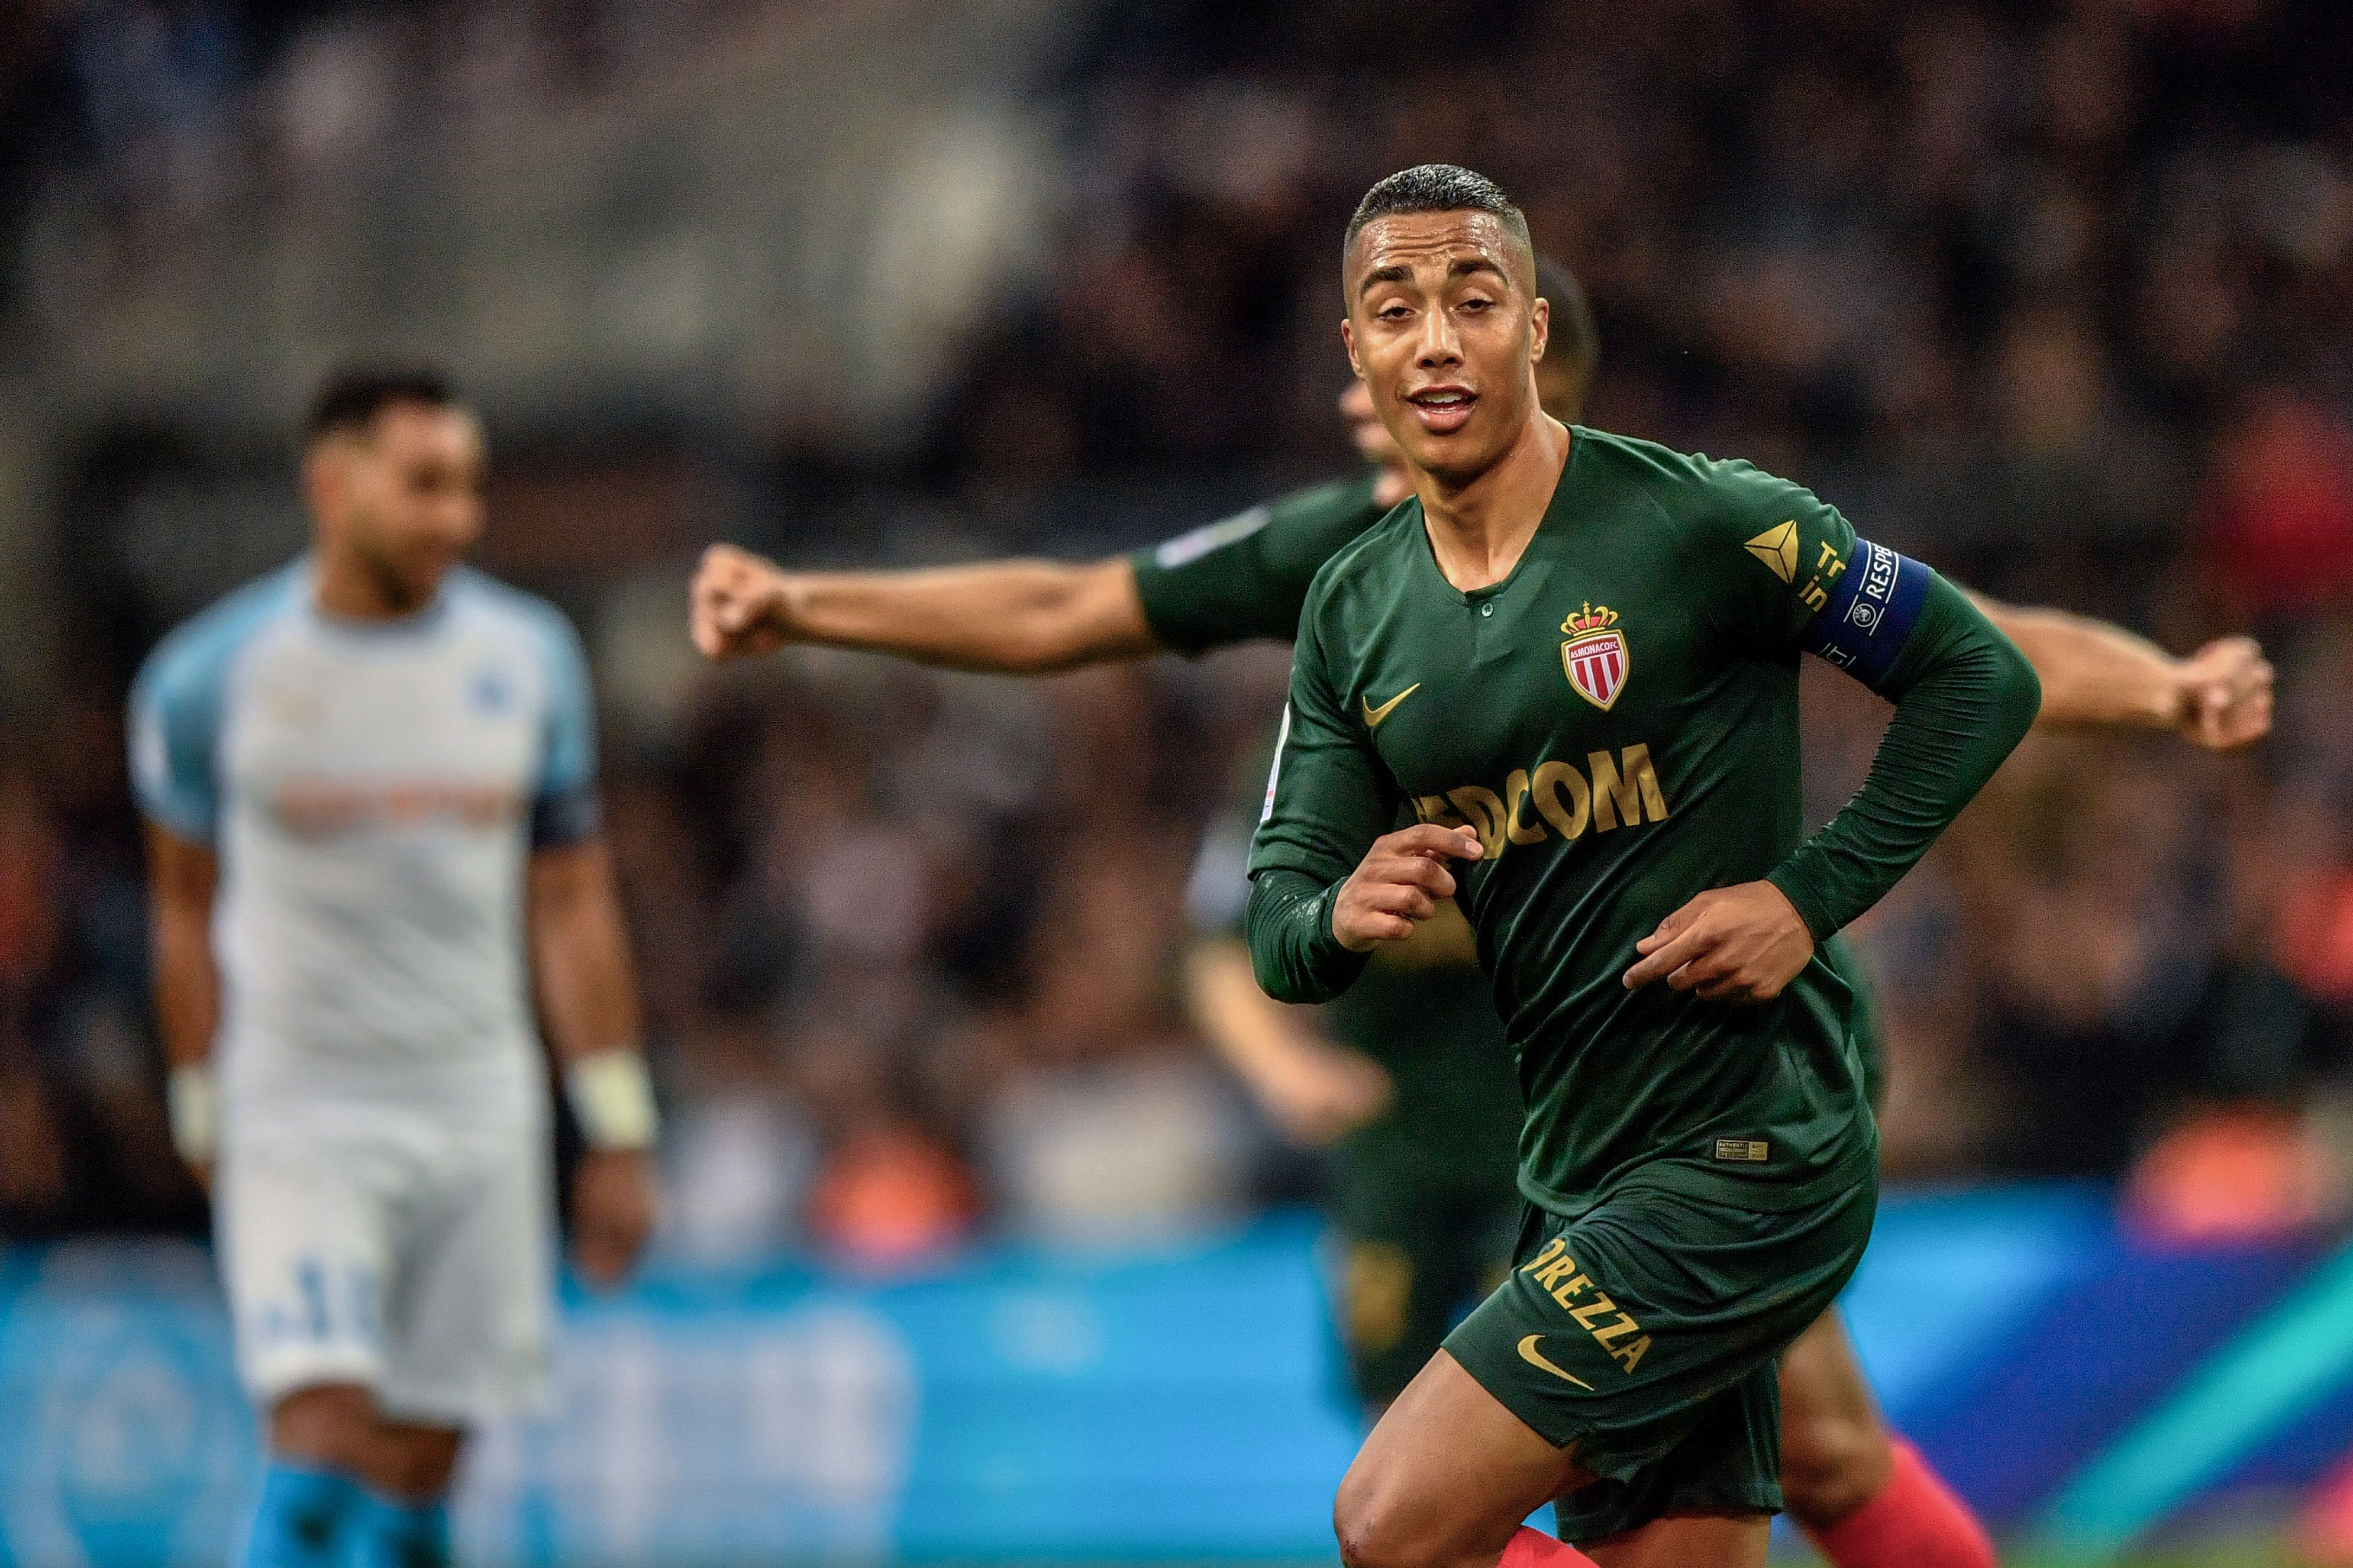 Monaco's Belgian midfielder Youri Tielemans celebrates after scoring during the French L1 football match between Olympique de Marseille and AS Monaco on January 13, 2019, at the Velodrome stadium in Marseille, southern France. (Photo by Christophe SIMON / AFP)        (Photo credit should read CHRISTOPHE SIMON/AFP/Getty Images)